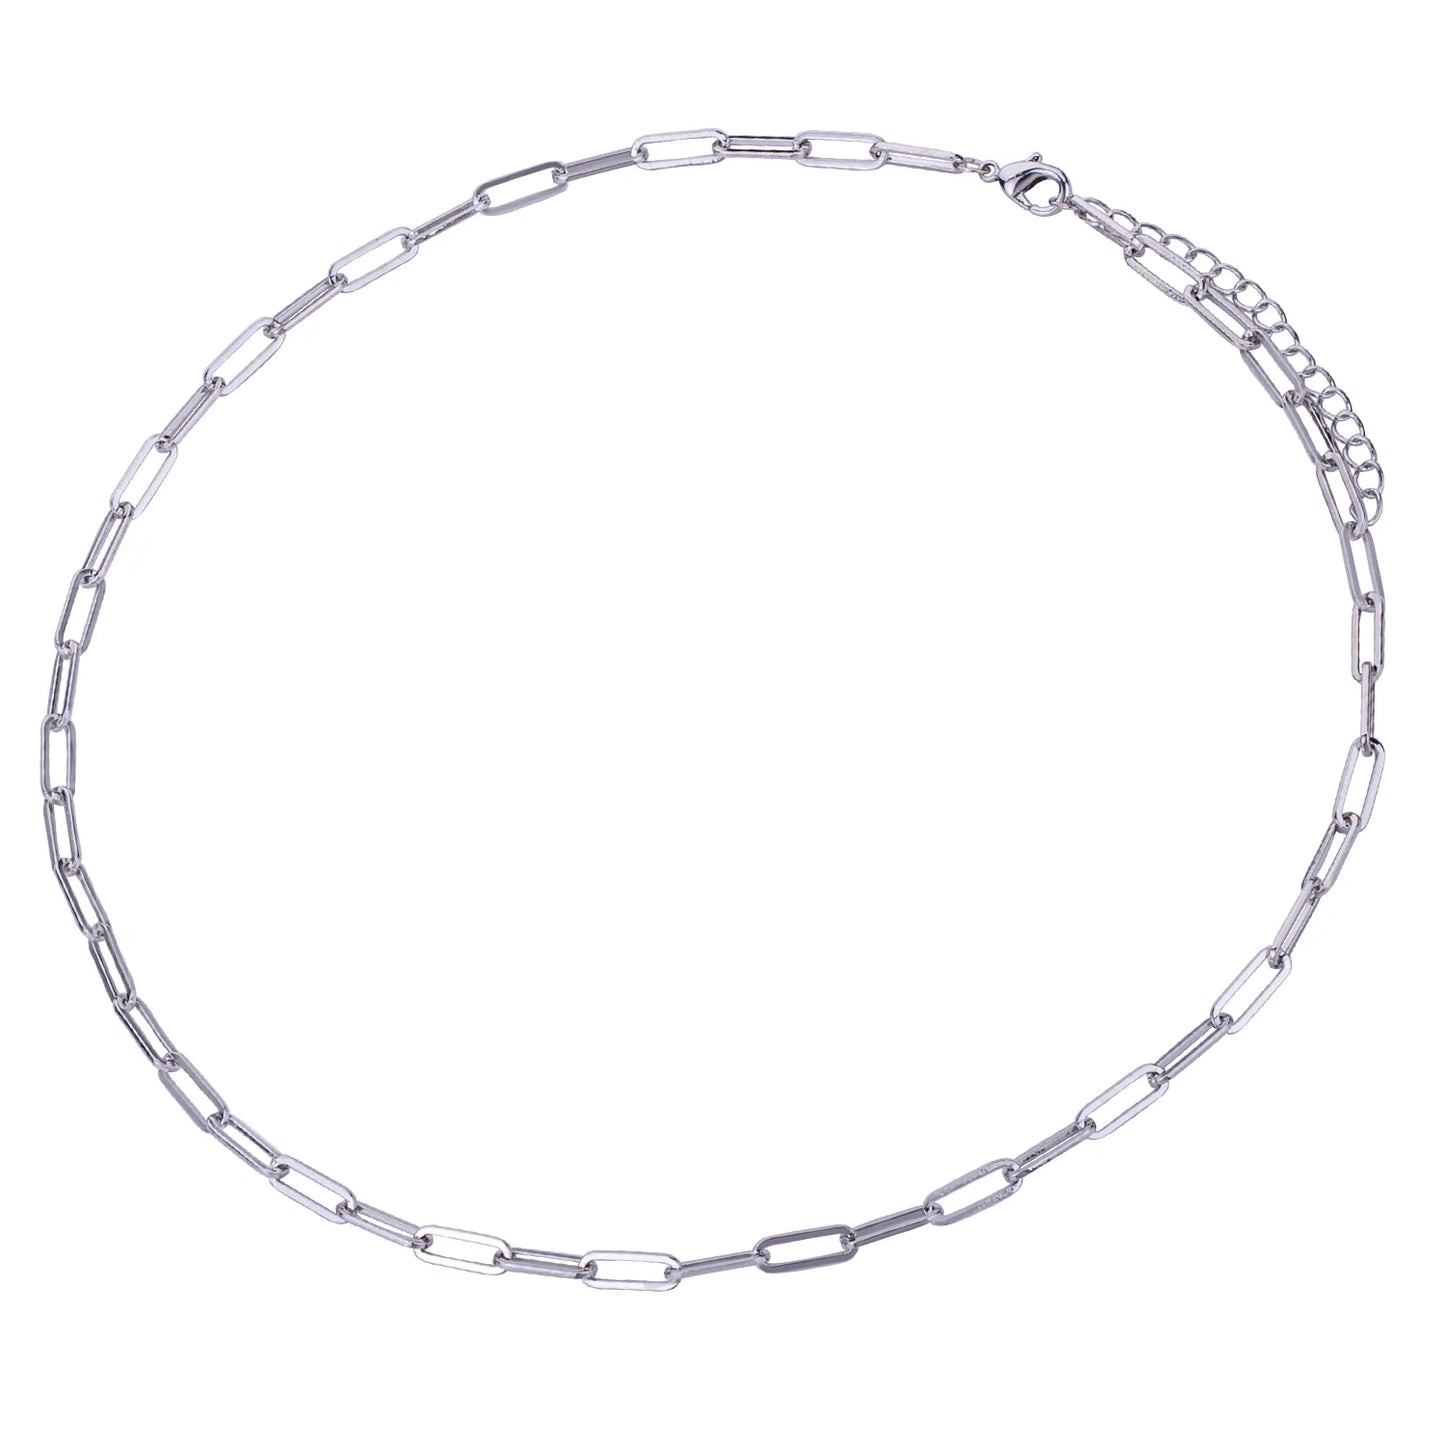 Alesha Short Chain Link Necklace Silver